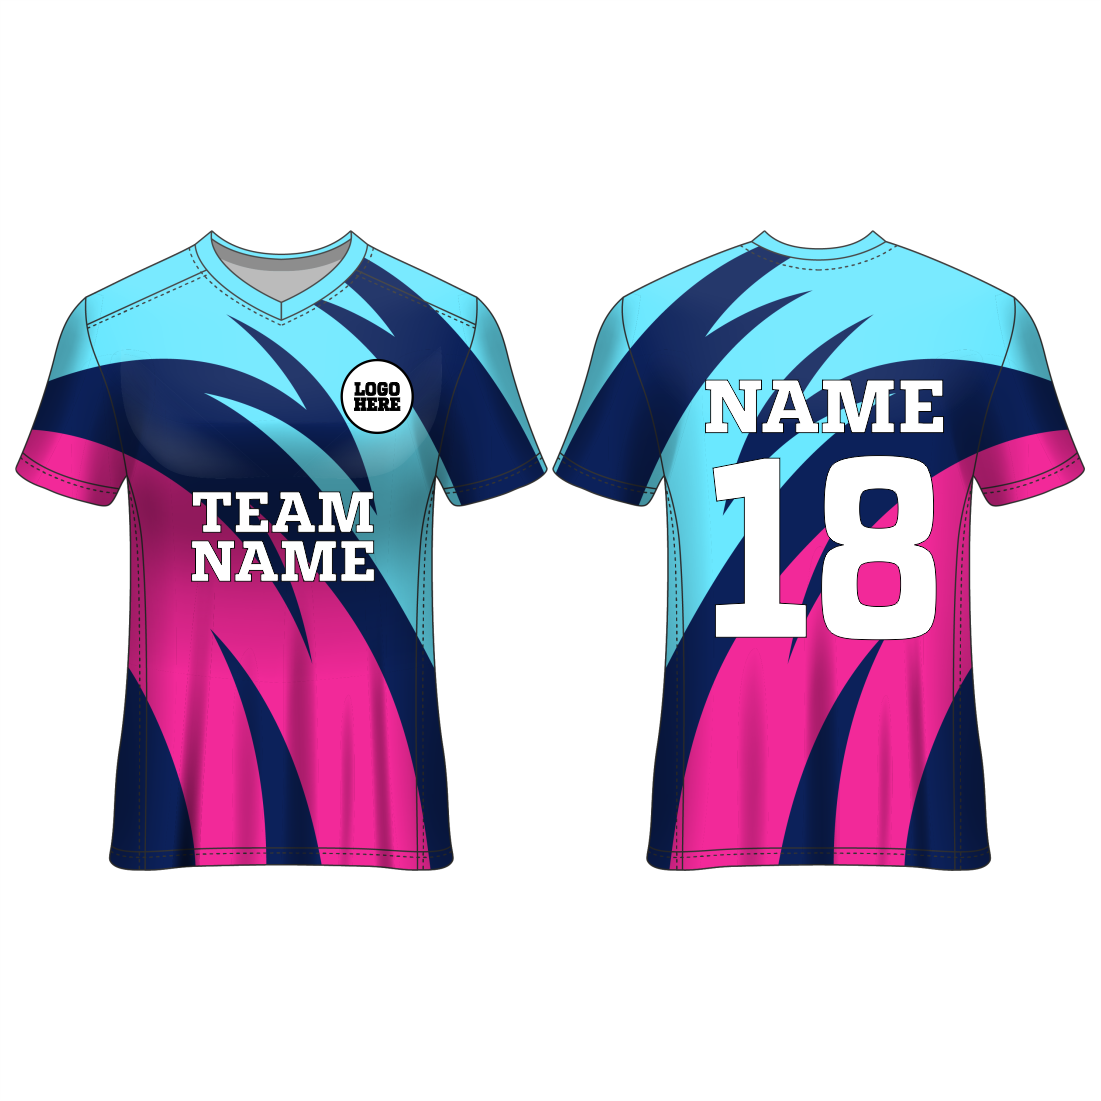 NEXT PRINT All Over Printed Customized Sublimation T-Shirt Unisex Spor –  Next Print